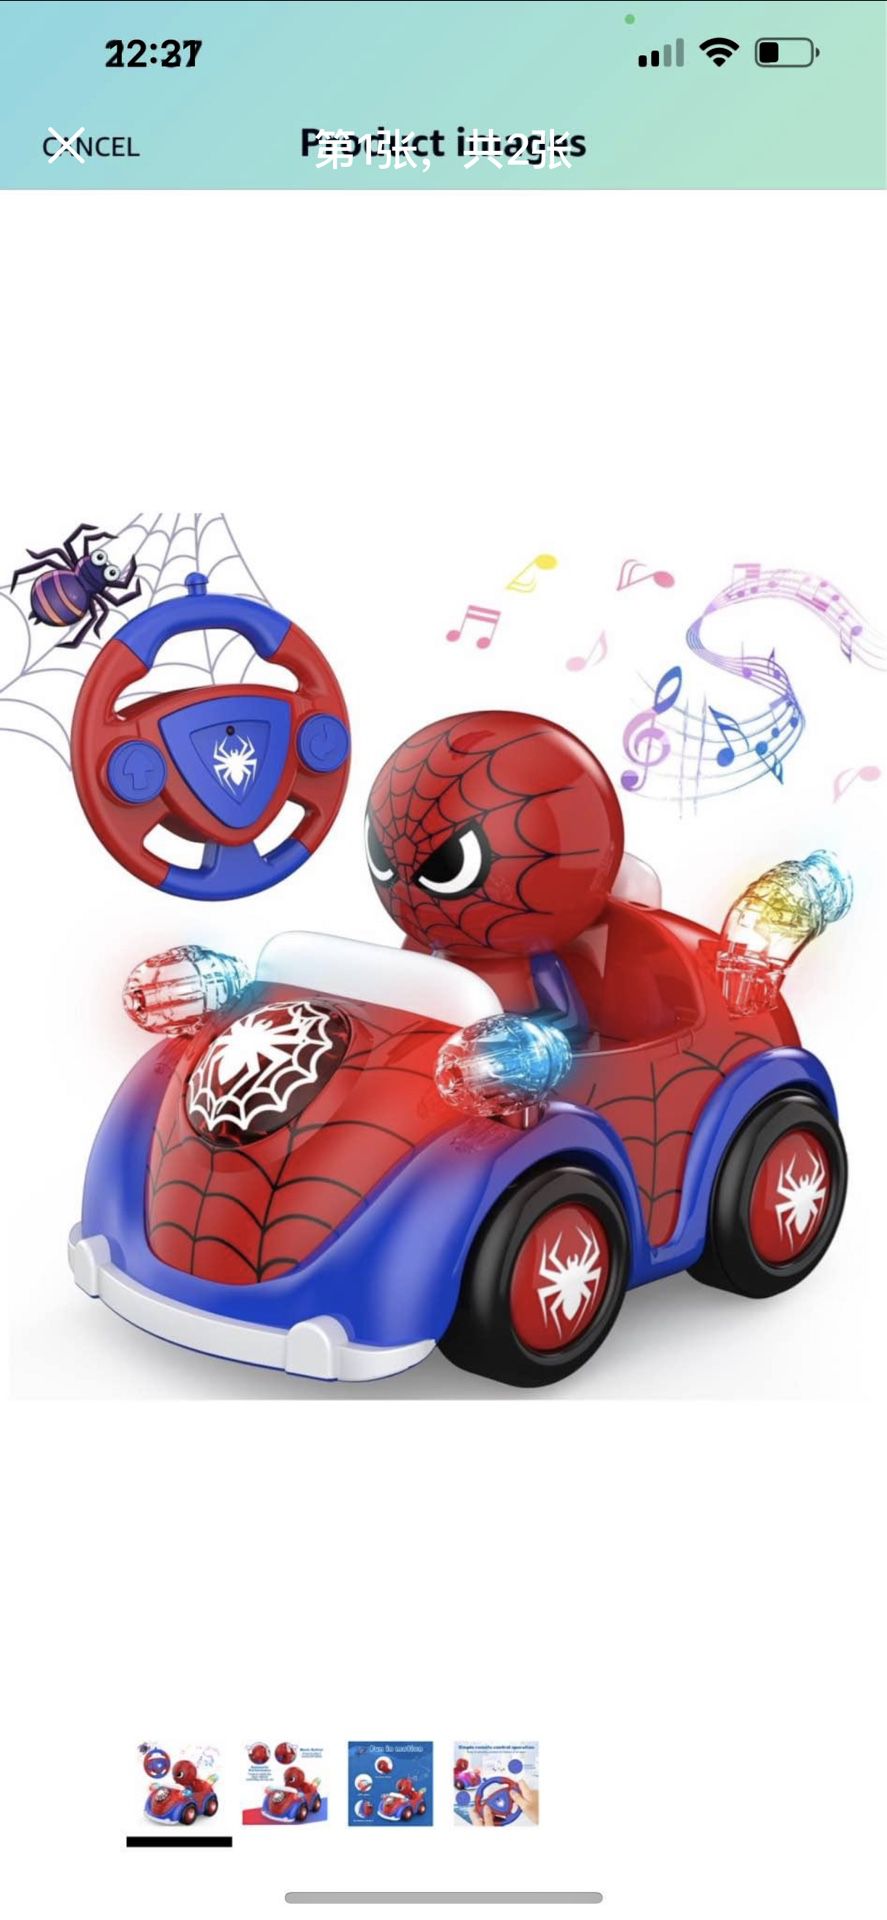 NQD Spider Remote Control Car for Toddlers, RC Cars with Music and Lights, ABS Material RC Cartoon Race Car Toys for Kids Birthday Gifts for Boys Age 